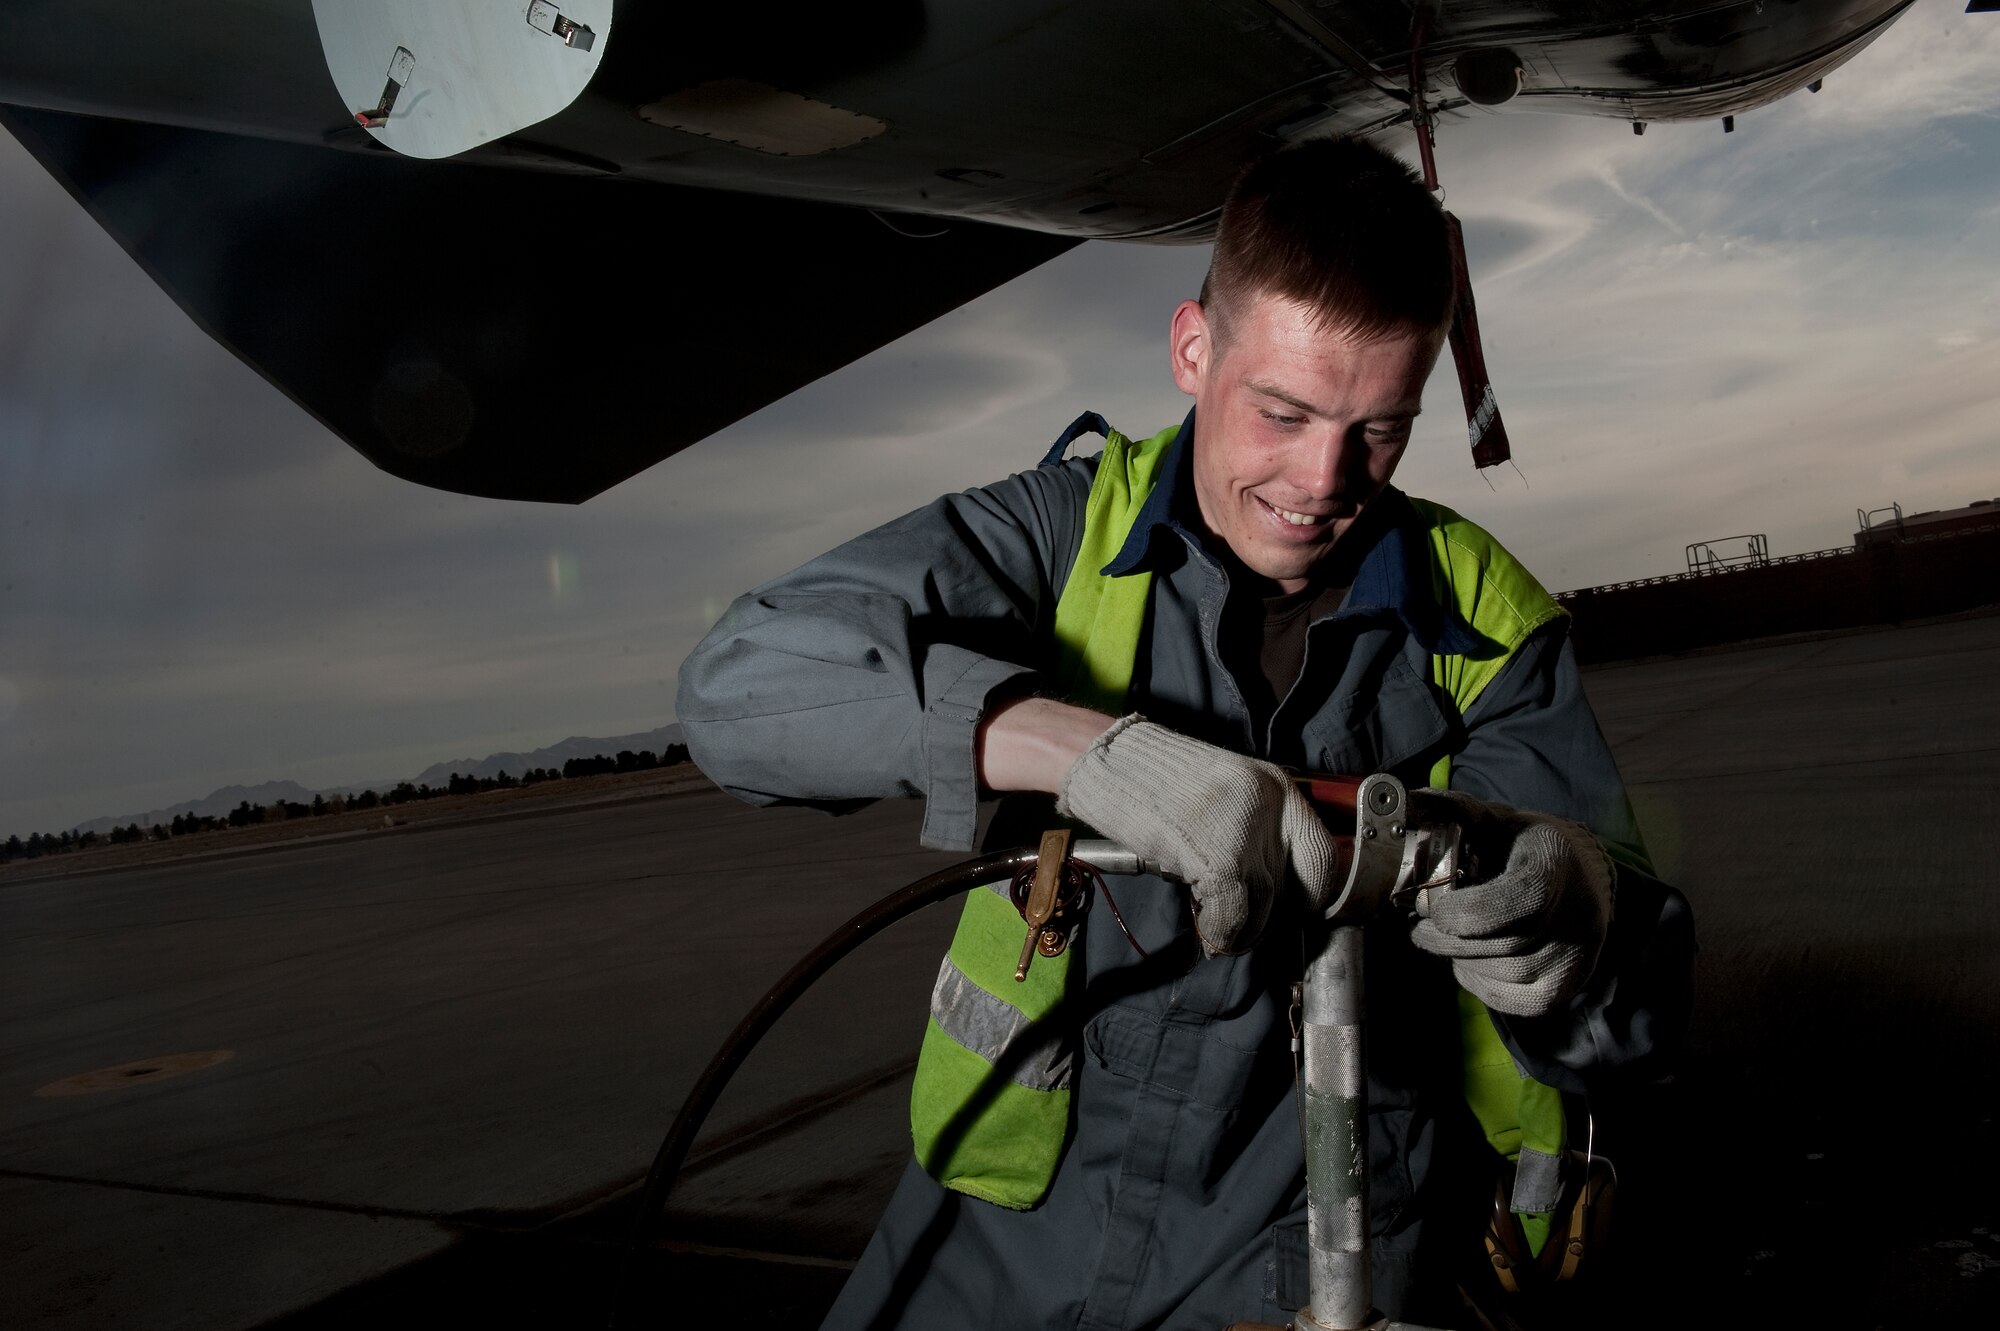 Royal Air Force of the United Kingdom Senior Aircraftsman Steven Collins, 2nd Army Cooperation Squadron, aircraft maintenance mechanic, RAF Marham, replenishes engine oils on a GR4 Tornado, during Red Flag 12-3 March 5, 2012, at Nellis Air Force Base, Nev. Red Flag is a realistic combat training exercise involving the air forces of the United States and its allies.(U.S. Air Force photo by Staff Sgt. Christopher Hubenthal)